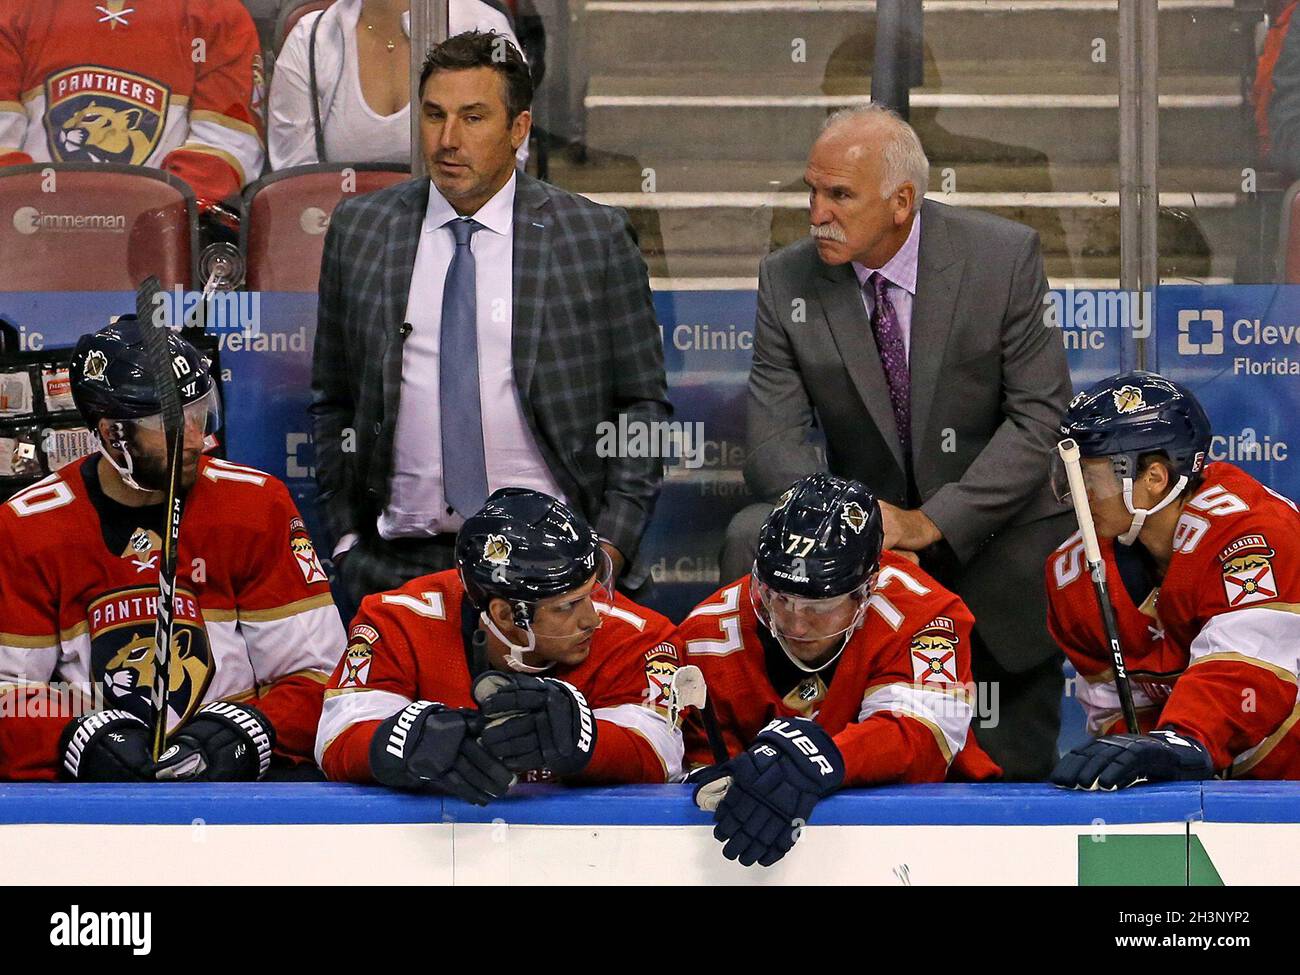 Sunrise, USA. 08th Oct, 2019. On Oct. 8, 2019, Florida Panthers head coach Joel Quenneville, top right, and assistant coach Andrew Brunette look from the bench during a game against the Carolina Hurricanes at the BB&T Center in Sunrise, Florida. (Photo by David Santiago/Miami Herald/TNS/Sipa USA) Credit: Sipa USA/Alamy Live News Stock Photo